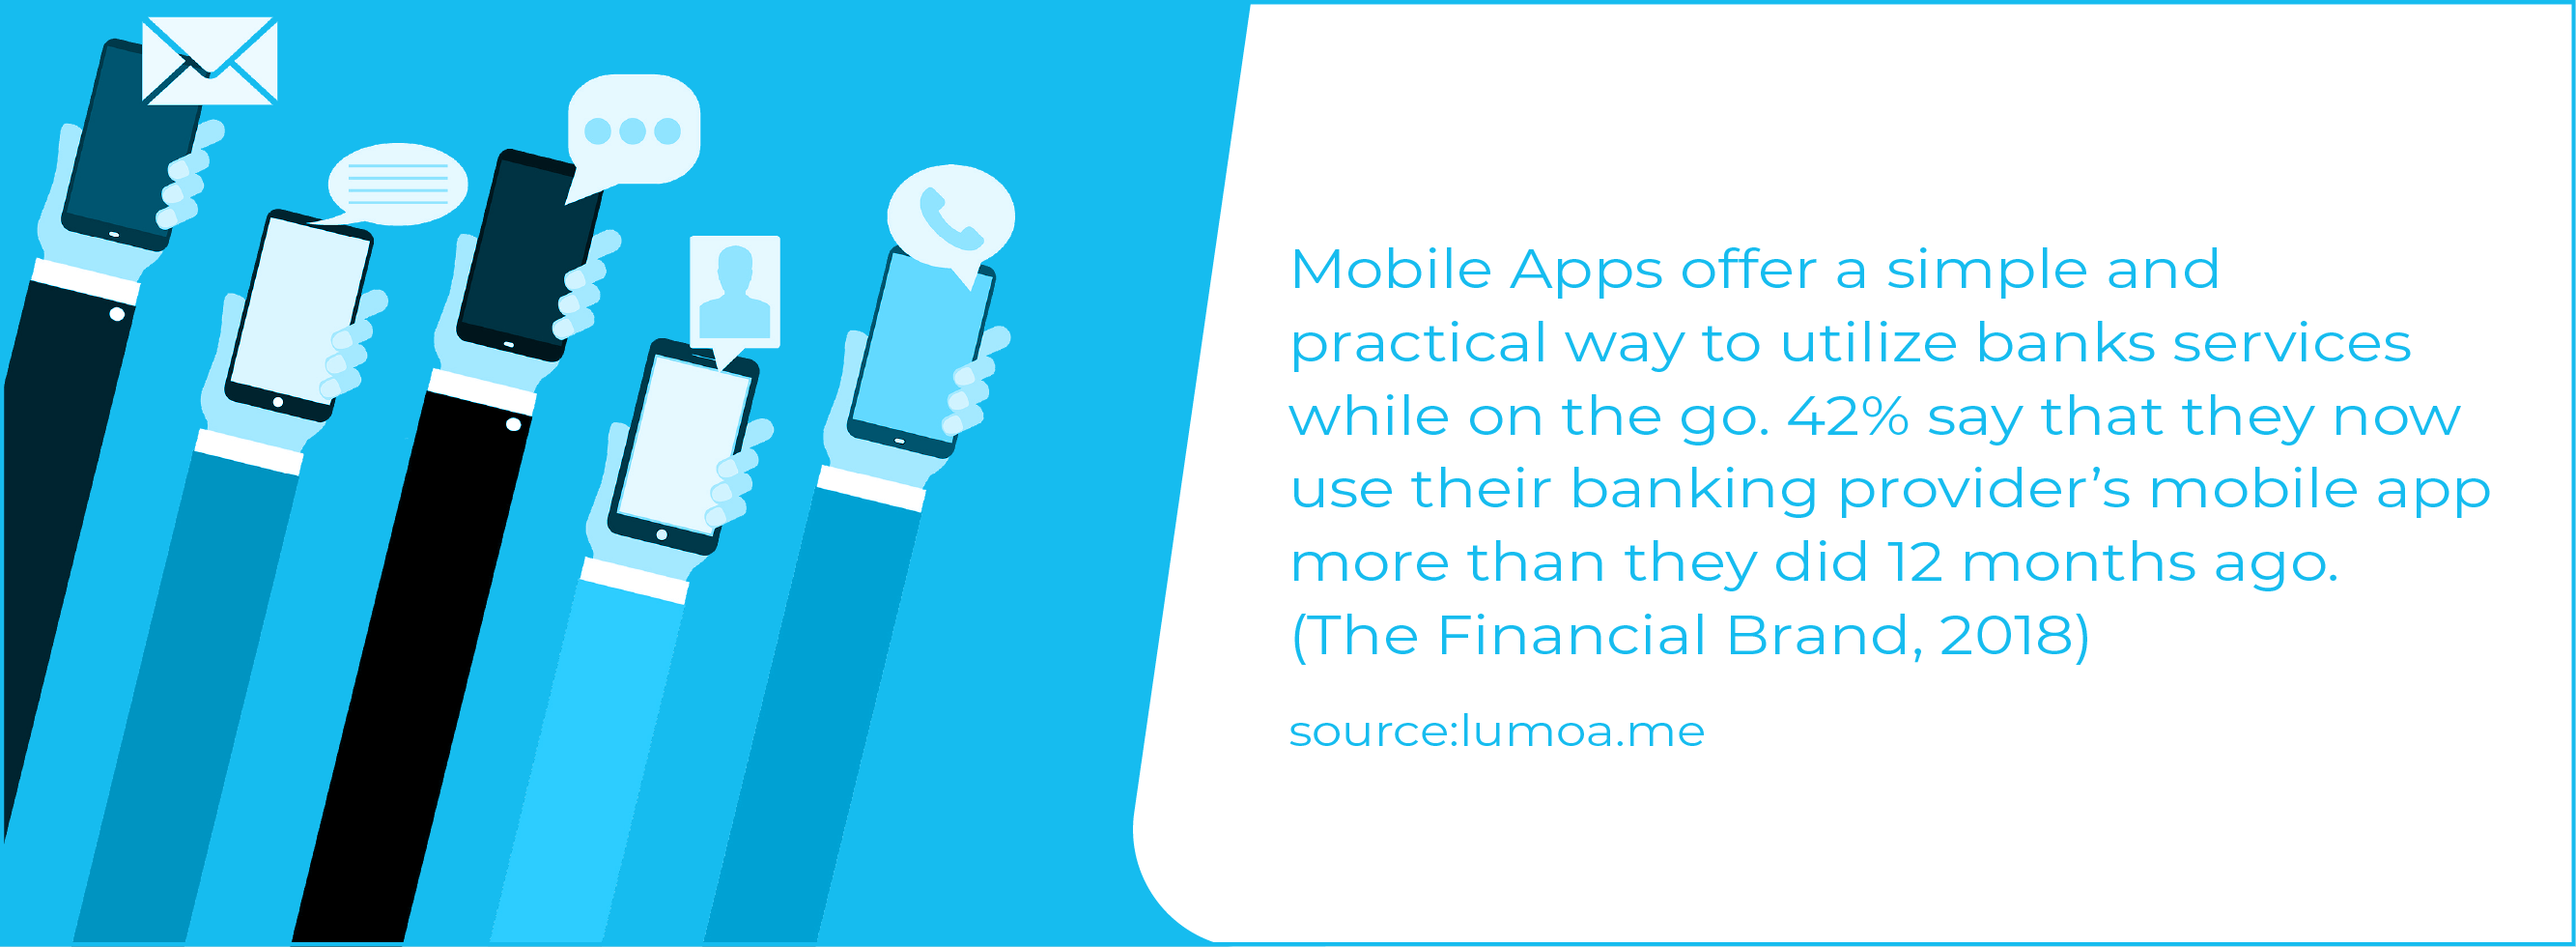 Mobile Apps offer a simple and practical way to utilize brank services while on the go.